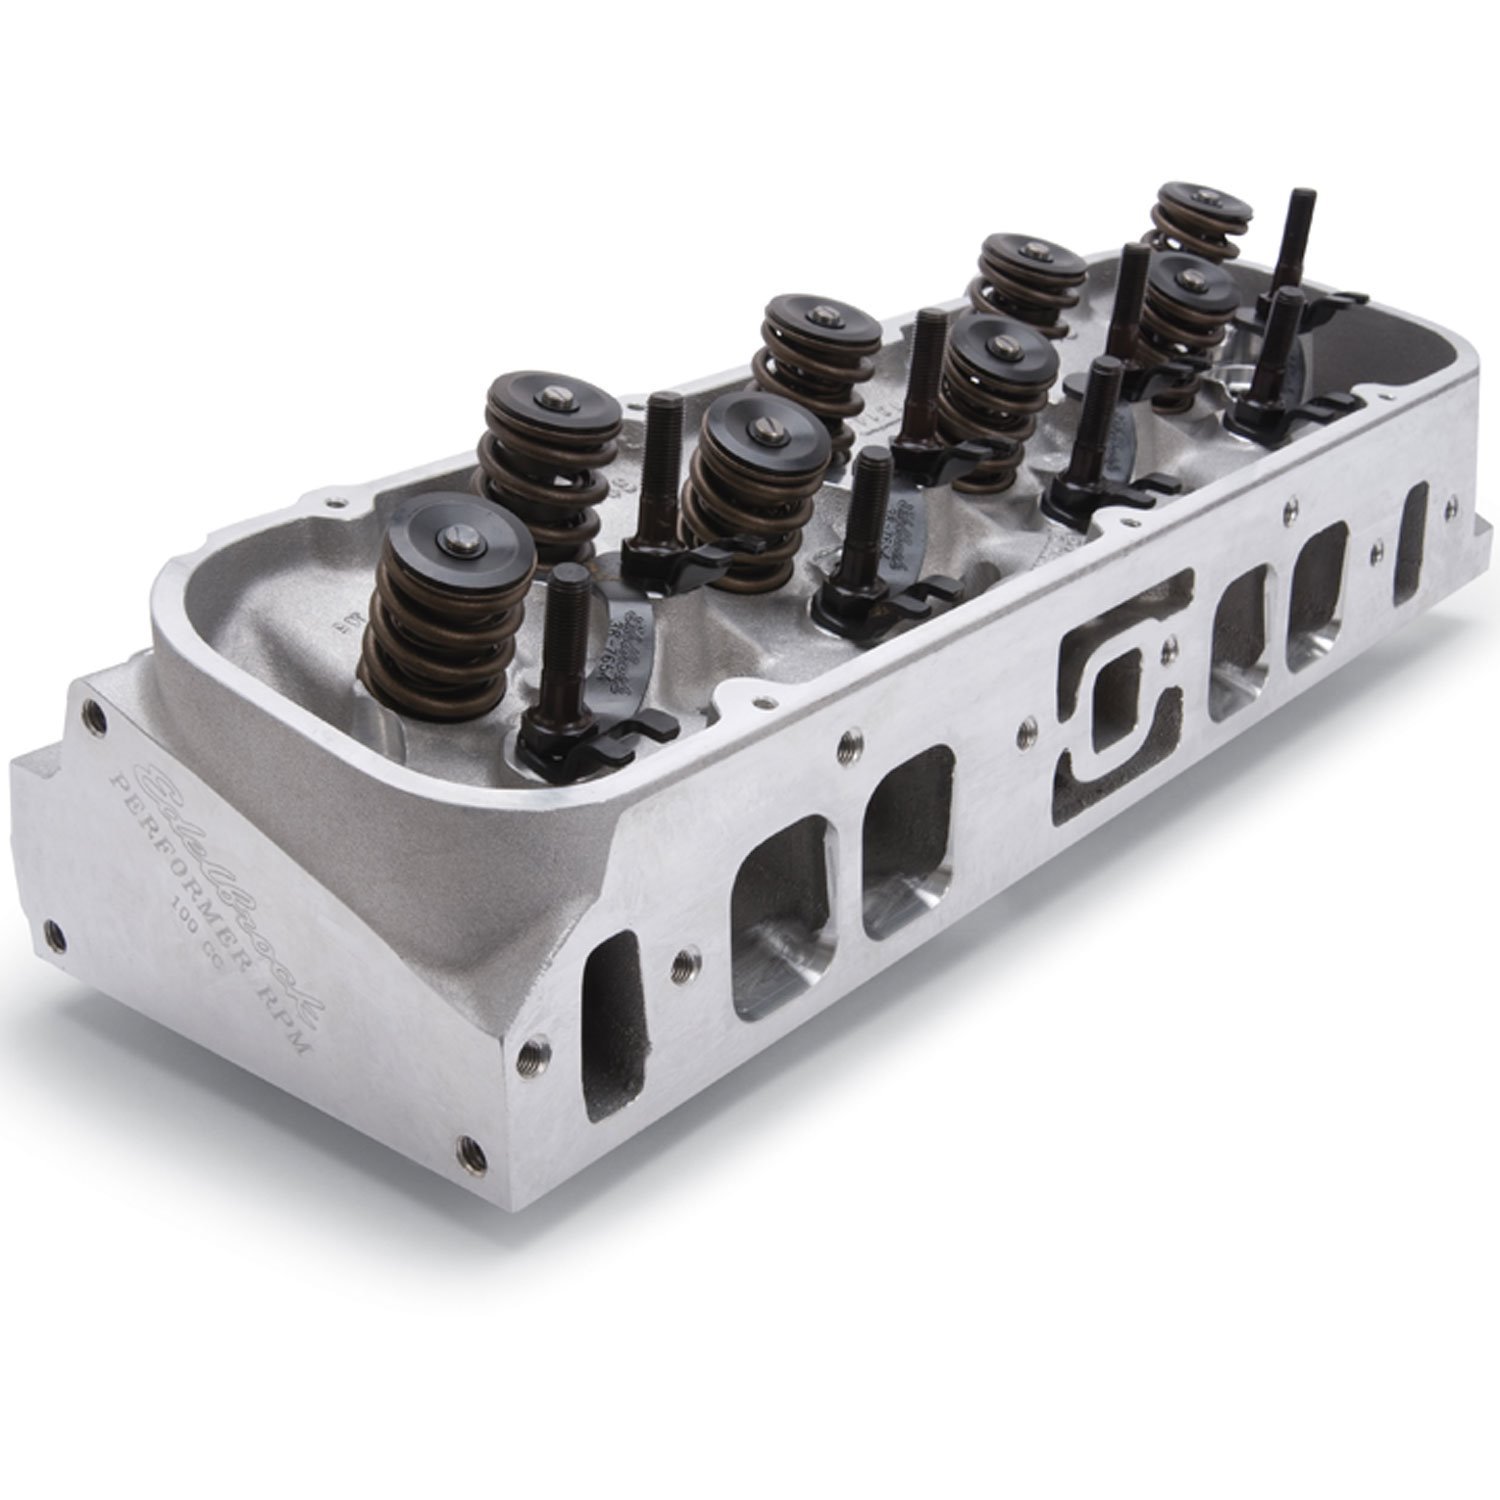 60435 Performer RPM High Compression 454 O-Port Cylinder Heads for Big Block Chevy